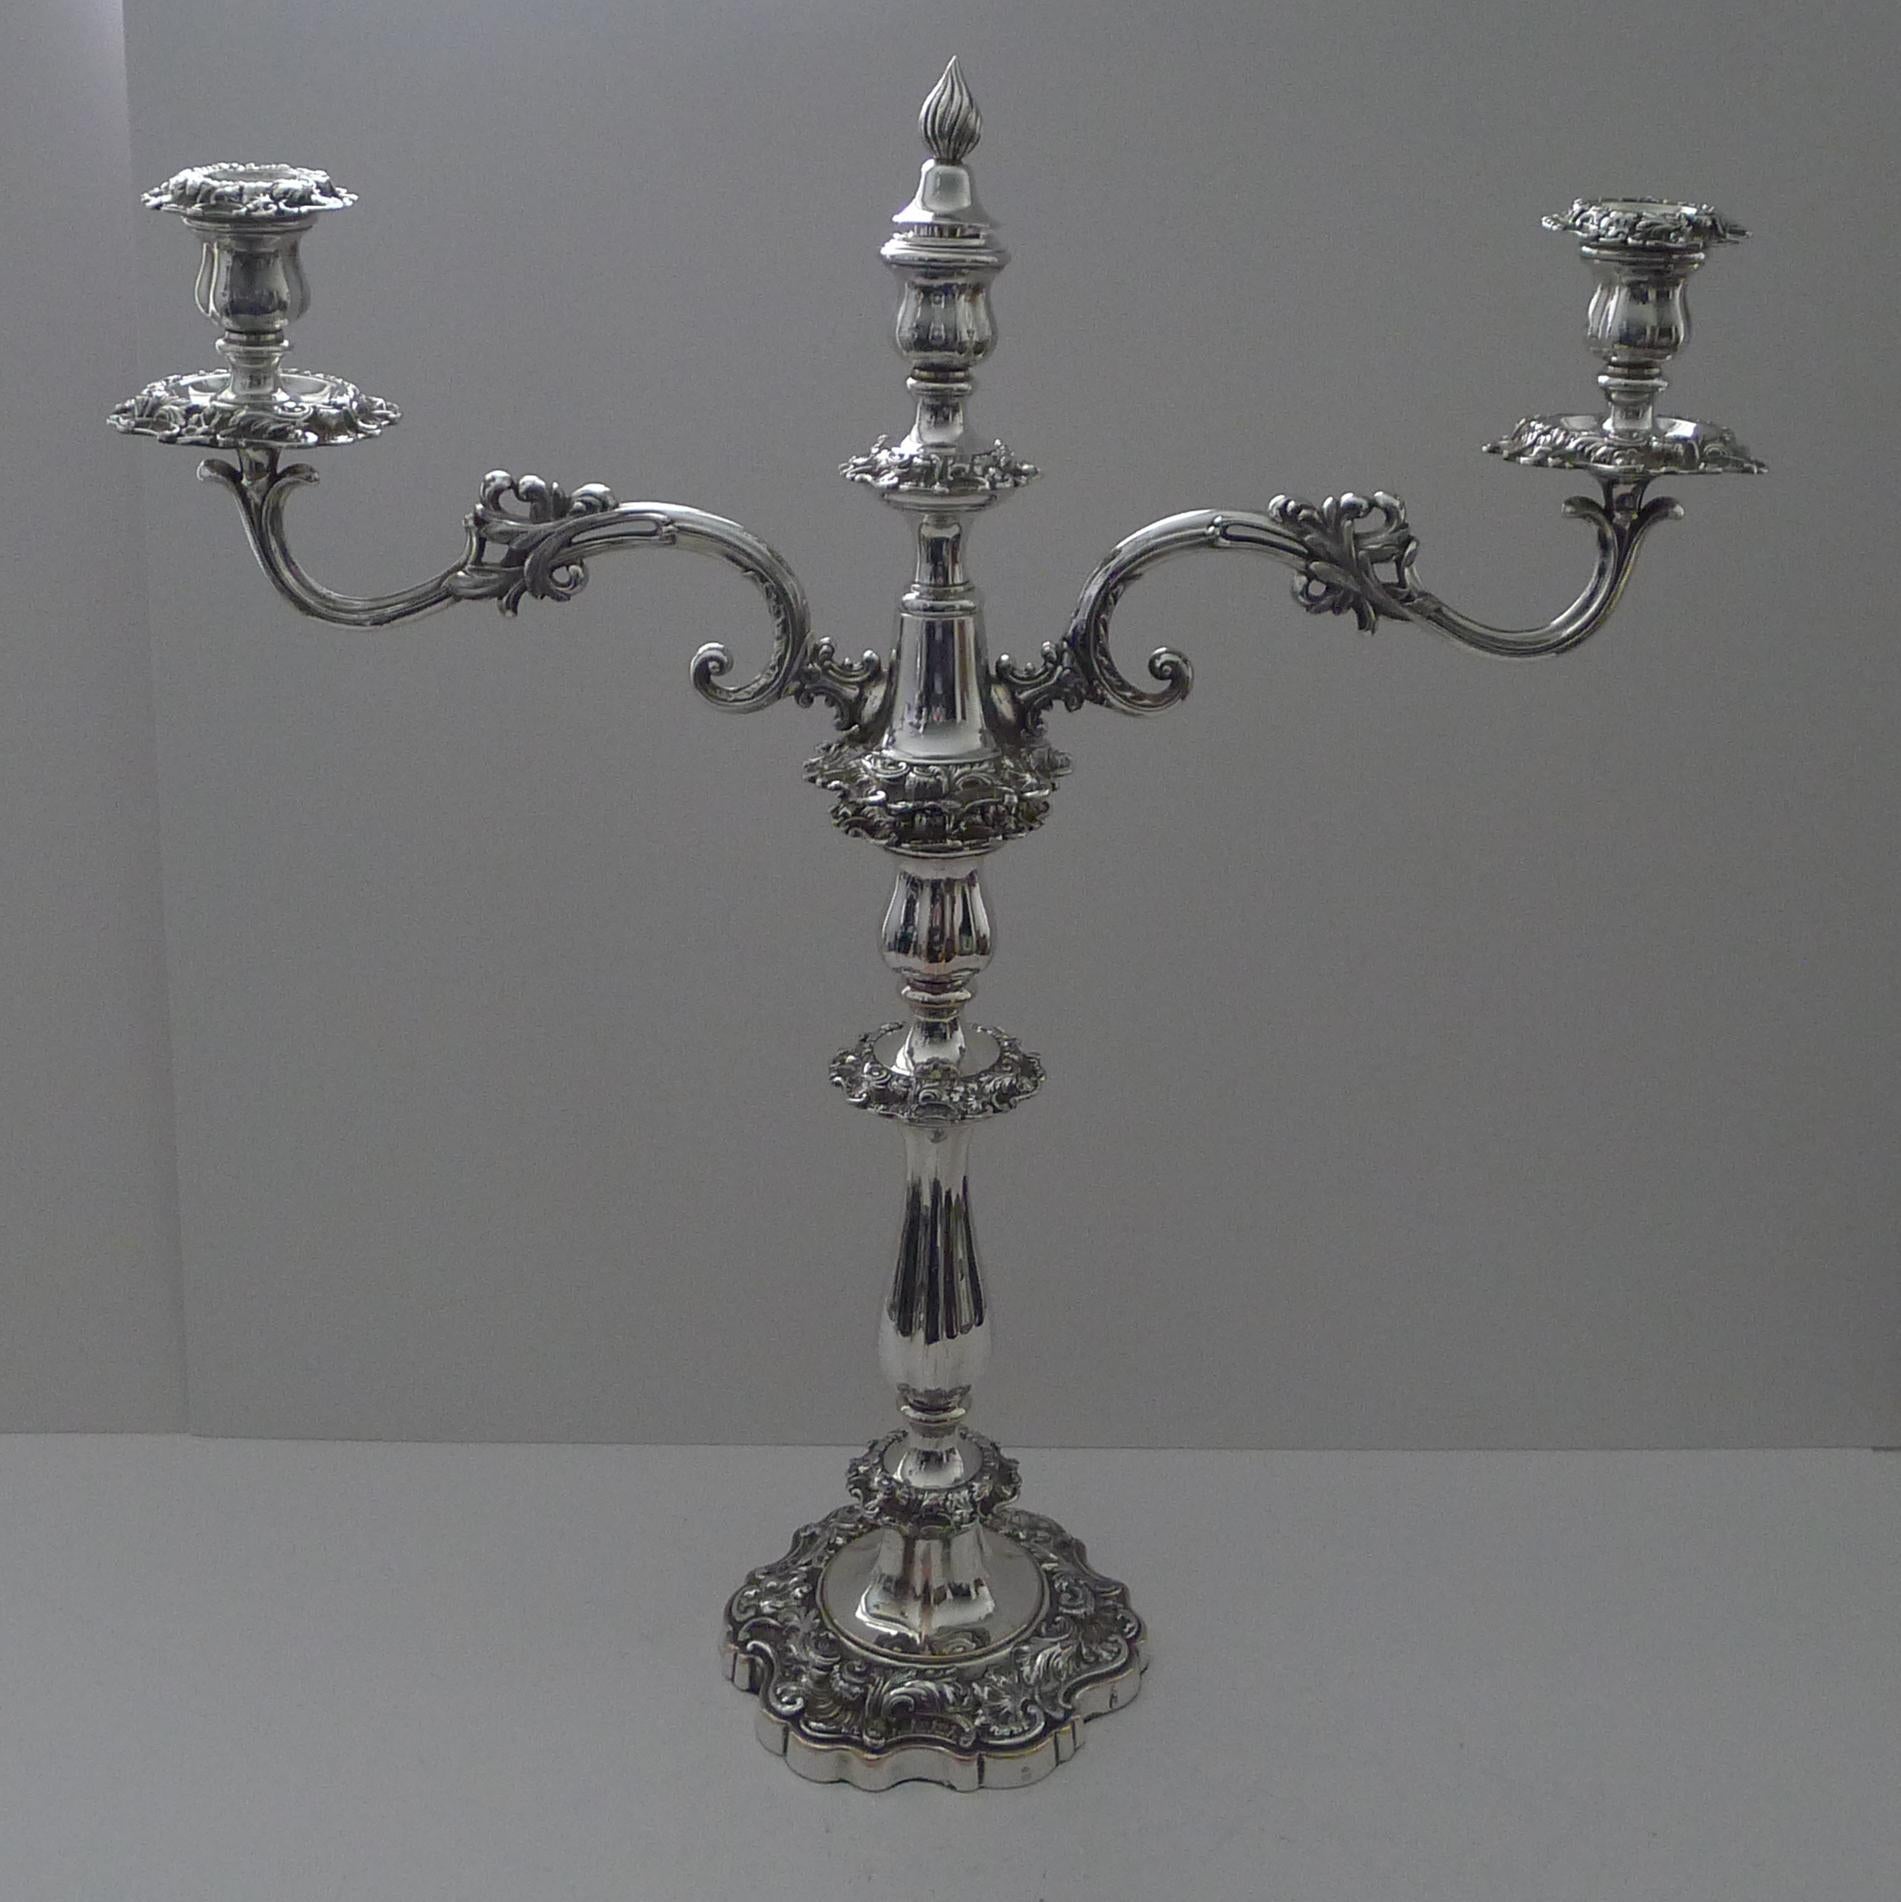 British Grand Pair Old Sheffield Plate Candelabra by Blagden, Hodgson & Co. For Sale